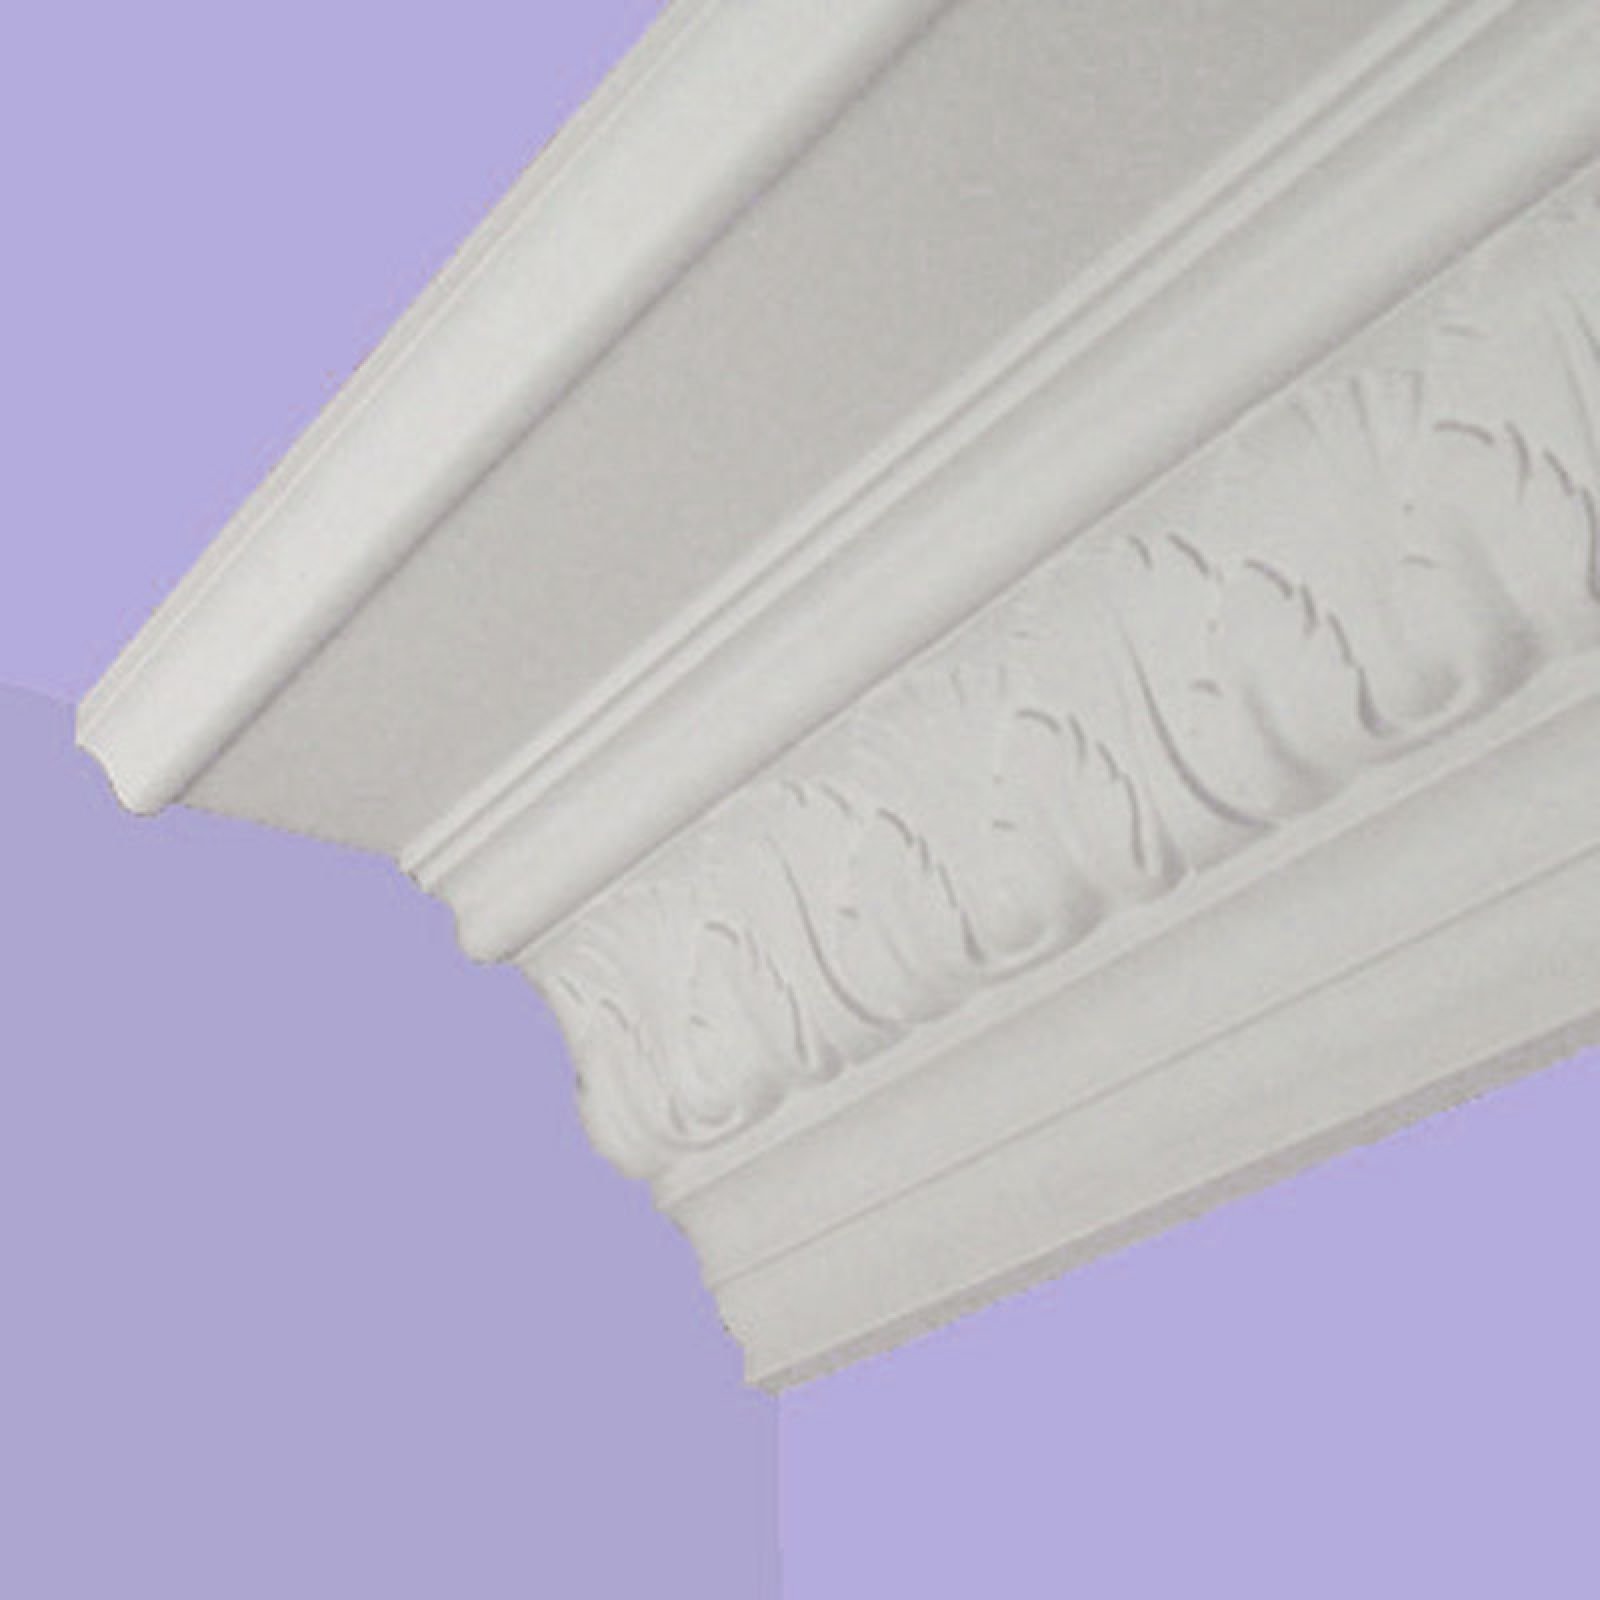 Victorian coving - Shell and leaf